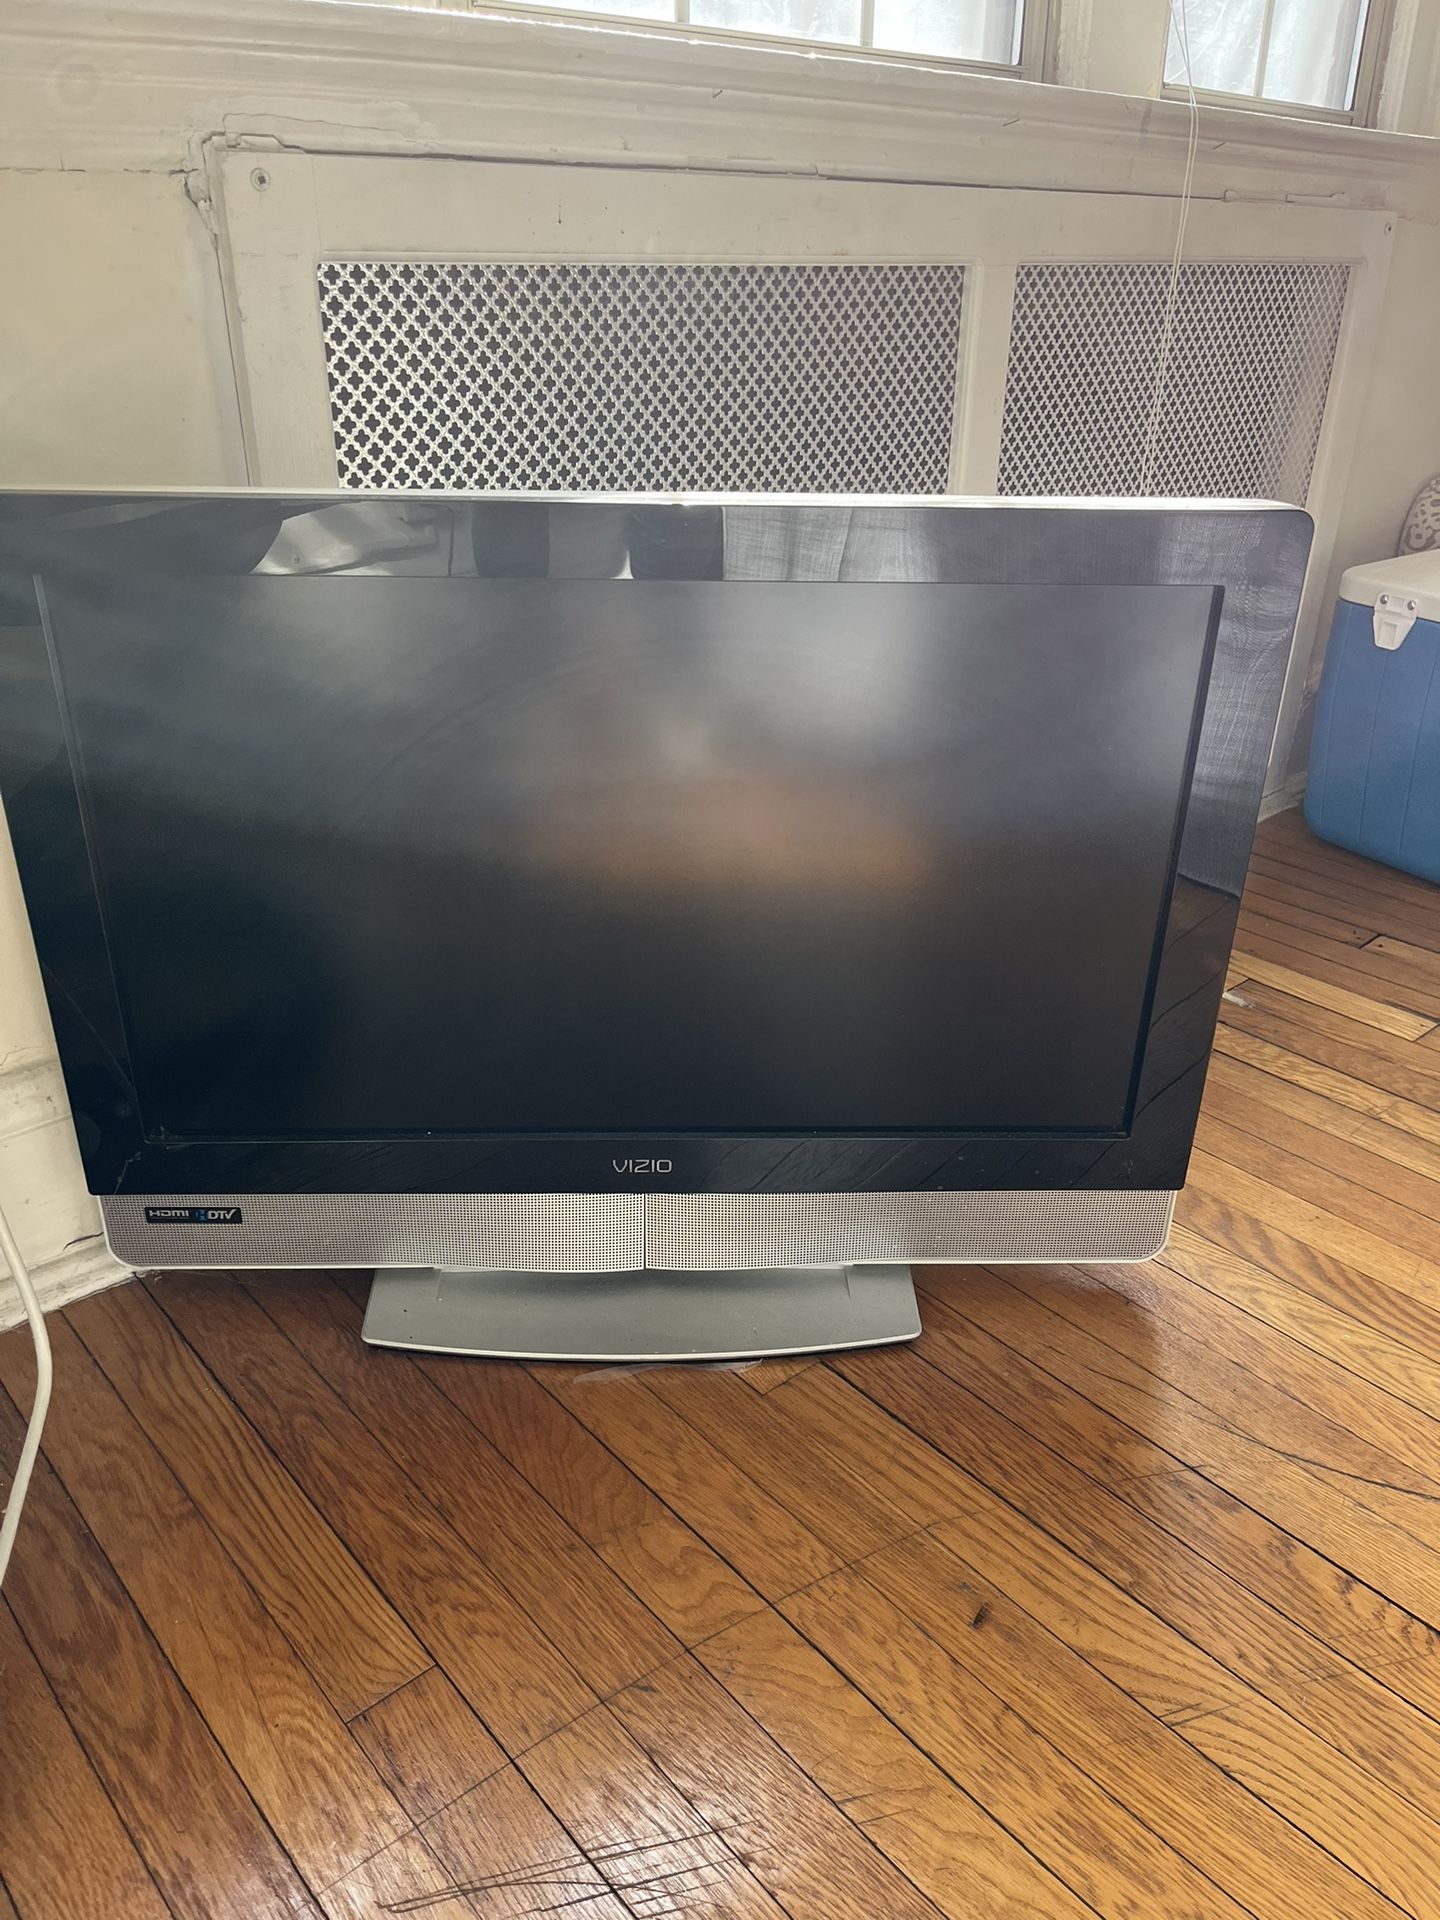 $50 TV For Sale! Can Connect To Your Roku